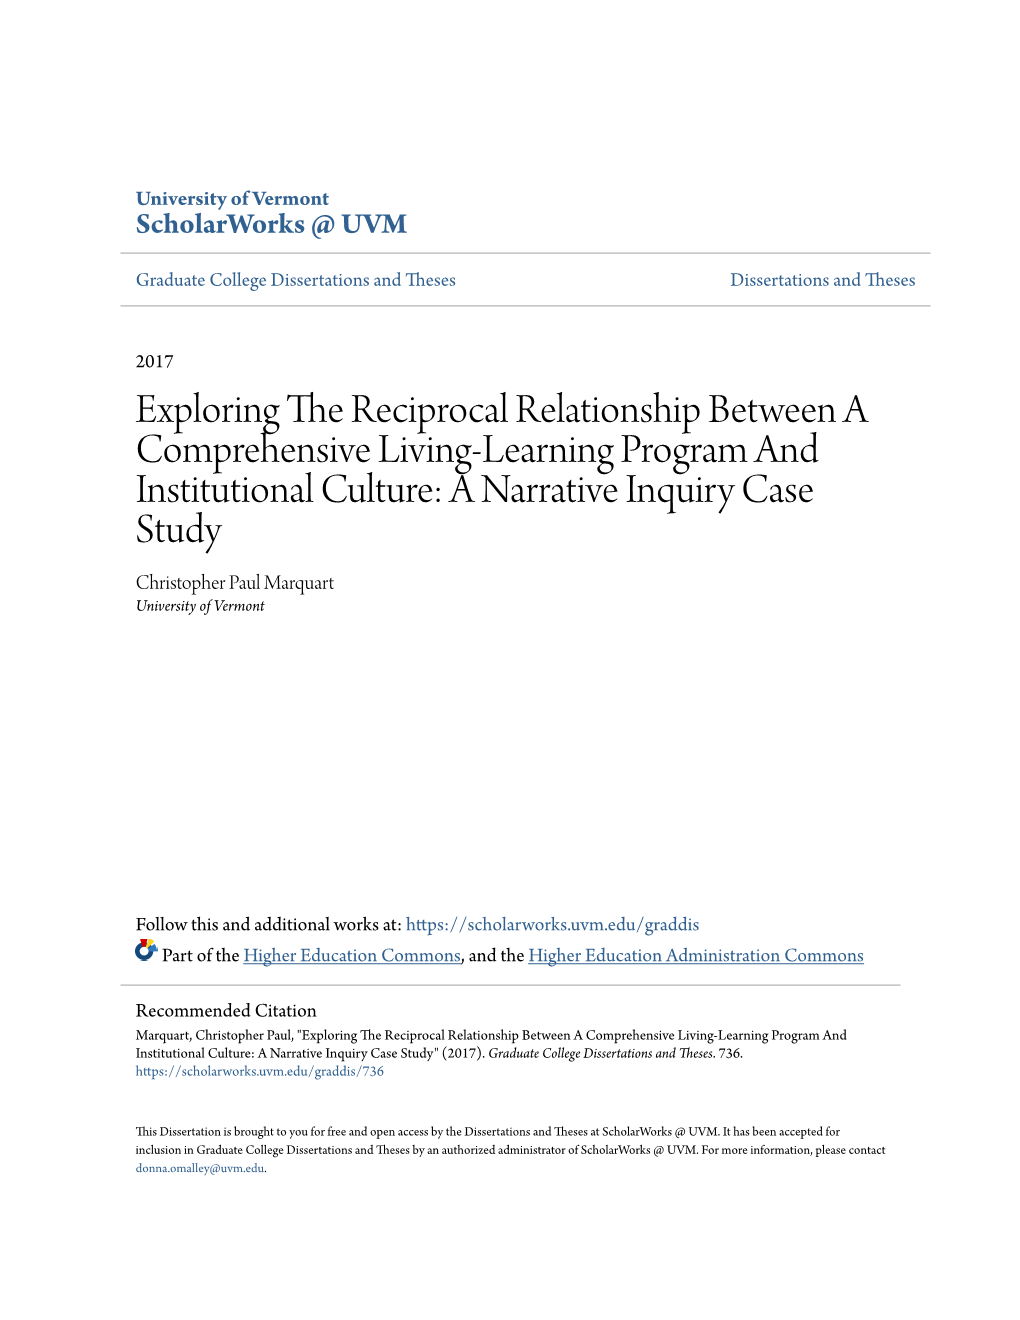 A Narrative Inquiry Case Study Christopher Paul Marquart University of Vermont